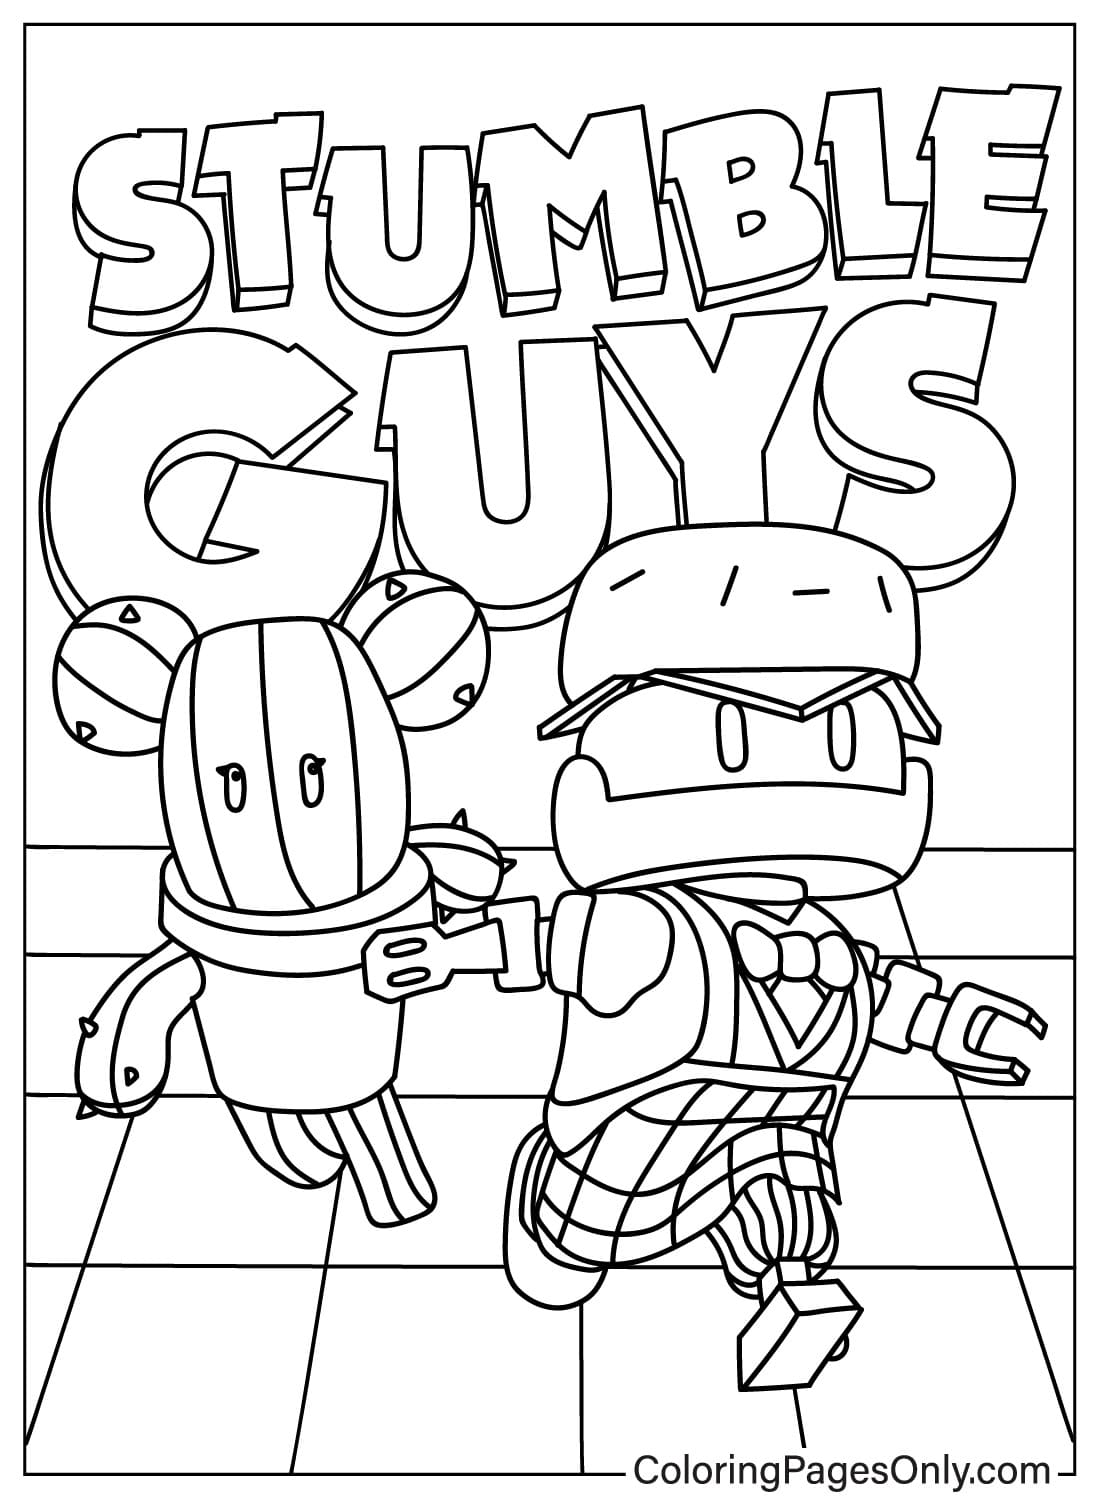 Stumble Guys Images Coloring Page from Stumble Guys